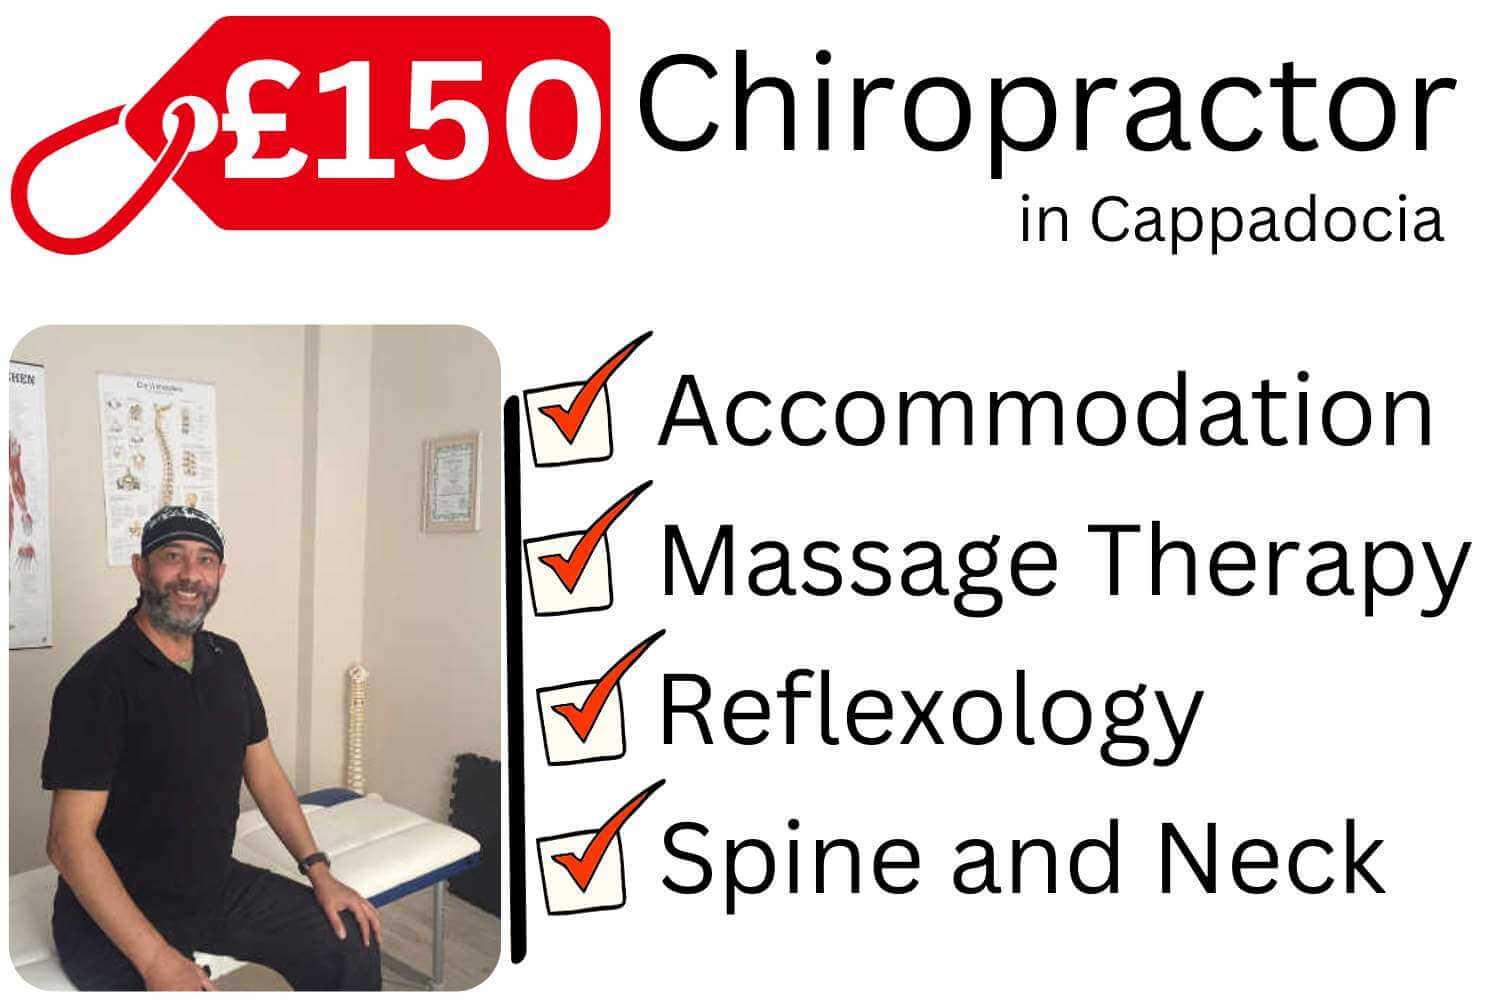 Erol Sahin, based in Urgup/ Nevsehir in Cappodocia is a Chiropractor and Holistic Therapist in Cappodocia, has Diplomas from UK Exeter College in several fields of prevalent and effective Holistic Therapy and Chiropractic Care Treatments, which he practised in the USA , UK and Europe Indian Head Massage Sports Massage Reflexology Alternative Treatments for Cronic Pains Erol Sahin is skilled and knowledged with a full range of techniques and sequences which he offers his patients from all over the world a deeply relaxing and rejuvenating treatment. Erol Sahin says he looks at treating the cause of a problem rather than just treating the symptoms. As a Chiropractor health care professiona,he focuses on the diagnosis and treatment of neuromuscular disorders, that affect your bones, muscles and joints with an emphasis on treatment through manual adjustment and/or manipulation of the spine. Holistic health Therapy combines five aspects, including physical, emotional, social, spiritual, and intellectual. When combined, these five areas; enable a person to live their life to its happiest and fullest. Holistic Therapy takes the body as a whole. Are you having difficulty in movement and function to your whole or some parts of the body after you have been affected by illness or injury? As a Chiropractor, Mr Erol Sahin has a specialist interest in neck and back pain. Like osteopaths, he also looks at your body as a whole, how problems with your bones, muscles and joints affect your nervous system and general health. Although he focuses on the manipulation of the spine – he uses other techniques too.